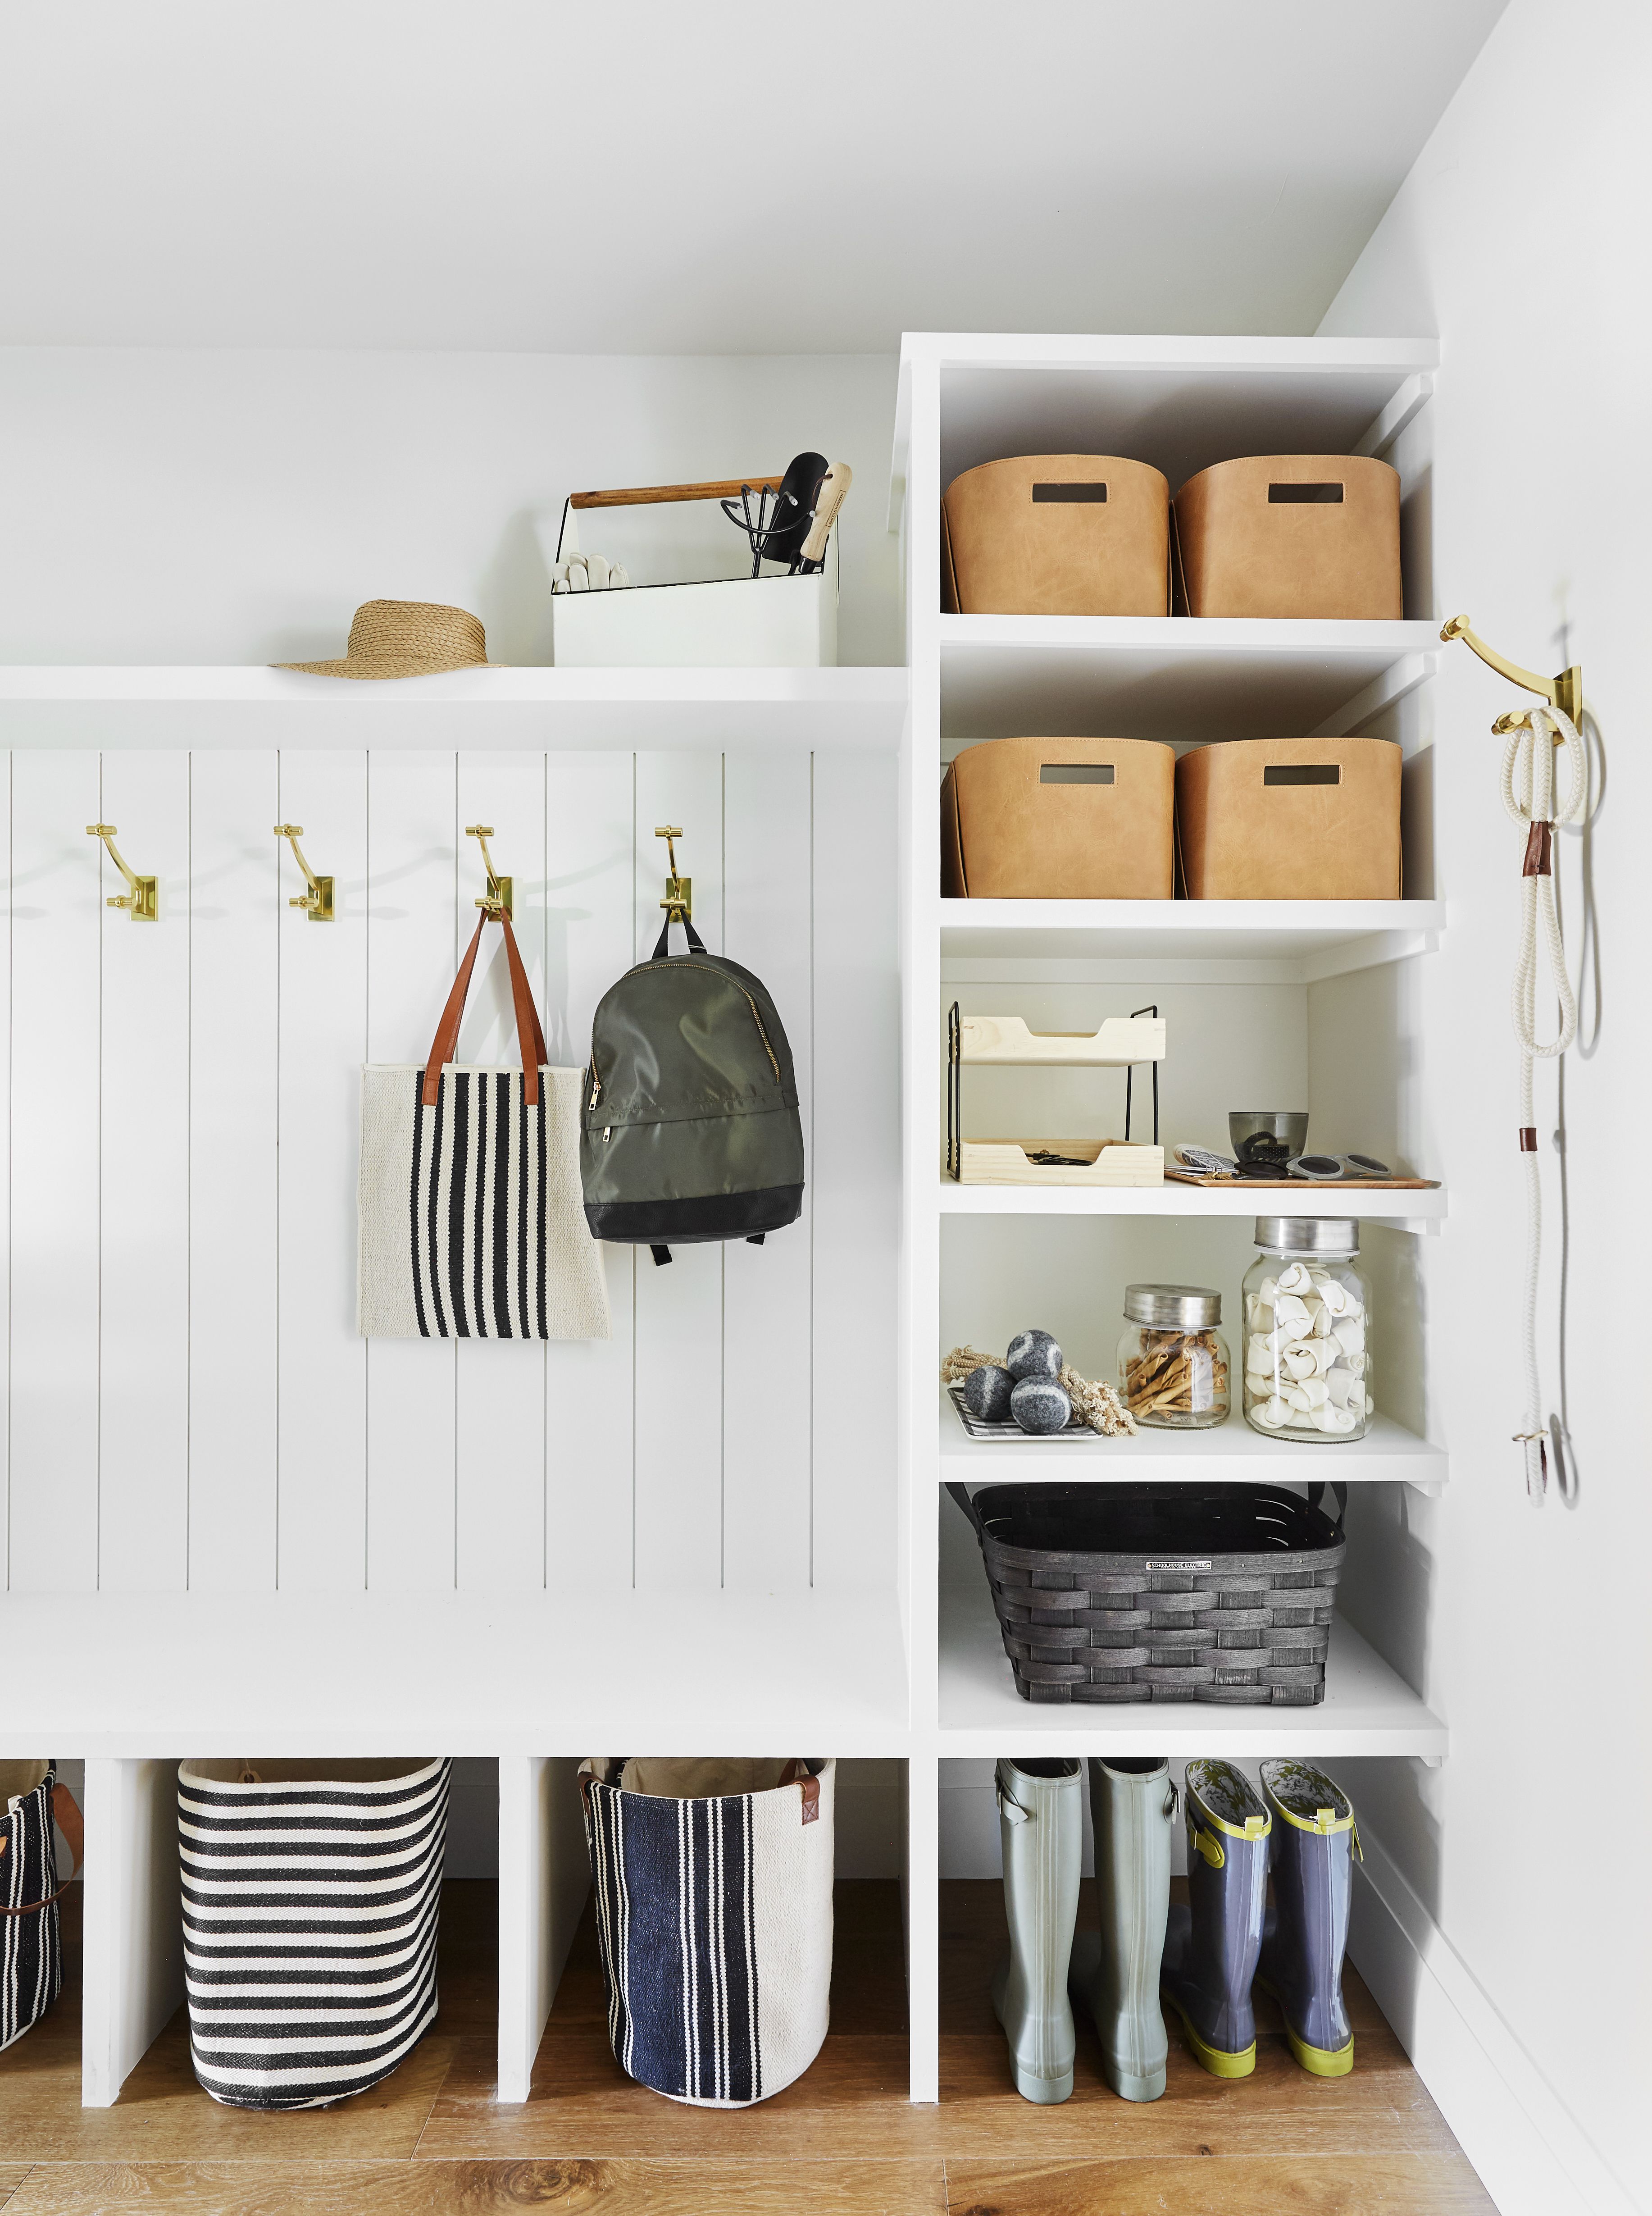 10 mudroom storage ideas — the best ways to organize a mudroom with cabinets baskets and more